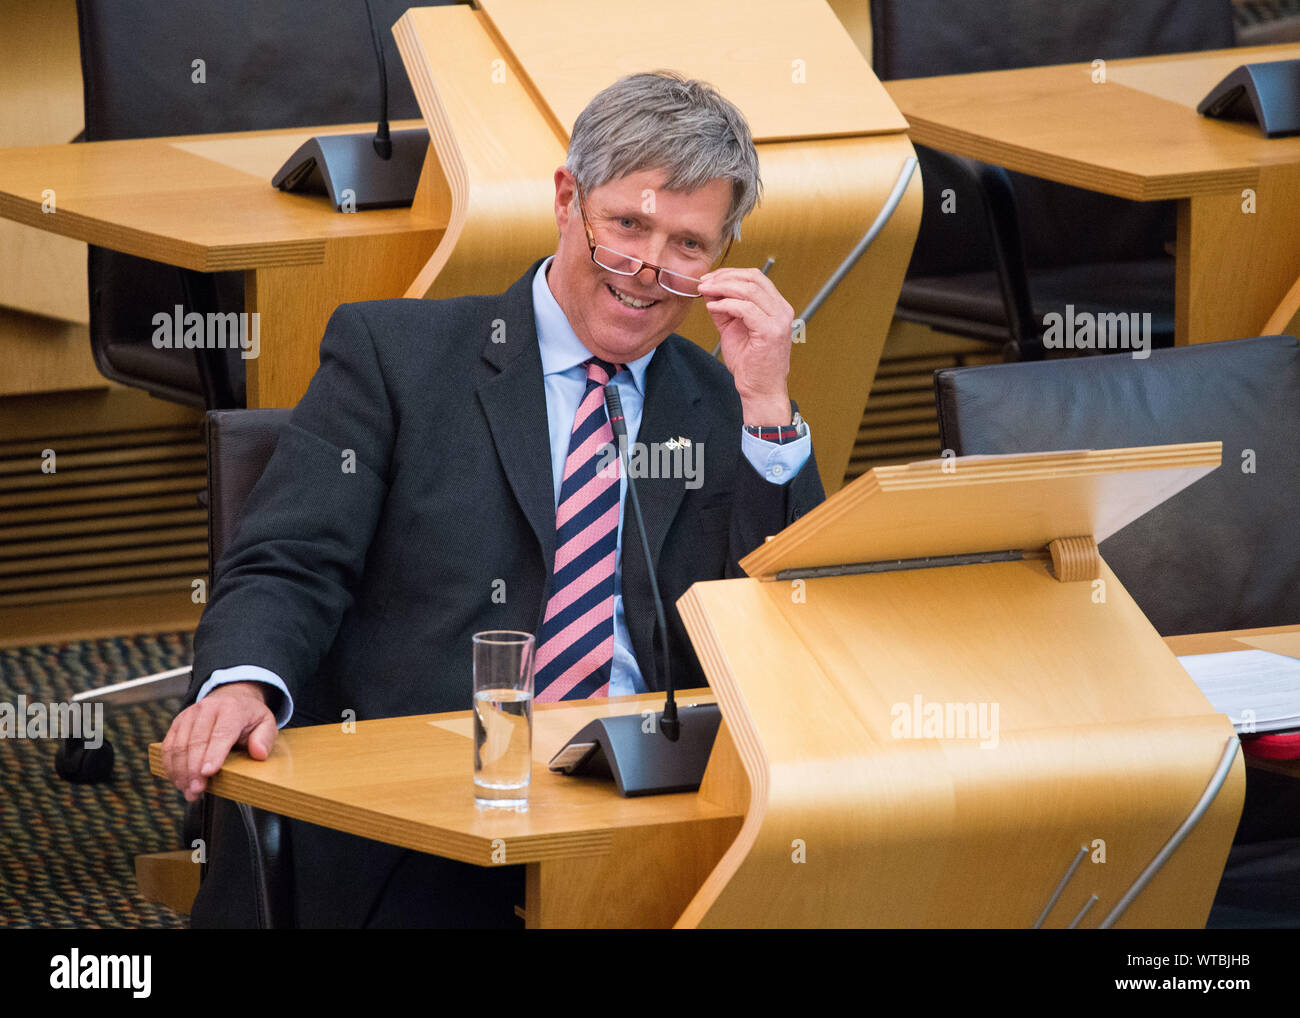 Edinburgh, UK. 5 September 2019. Pictured: Edward Mountain MSP - Shadow Cabinet Secretary for Rural Affairs and the Islands. Scottish Government Debate: Avoiding A No Deal Exit From The EU.  That the Parliament agrees that the UK should in no circumstances leave the EU on a no-deal basis, and condemns the Prime Minister’s suspension of the UK Parliament from as early as 9 September until 14 October 2019. The result of the division is: For 87, Against 28, Abstentions 0. Colin Fisher/CDFIMAGES.COM Stock Photo